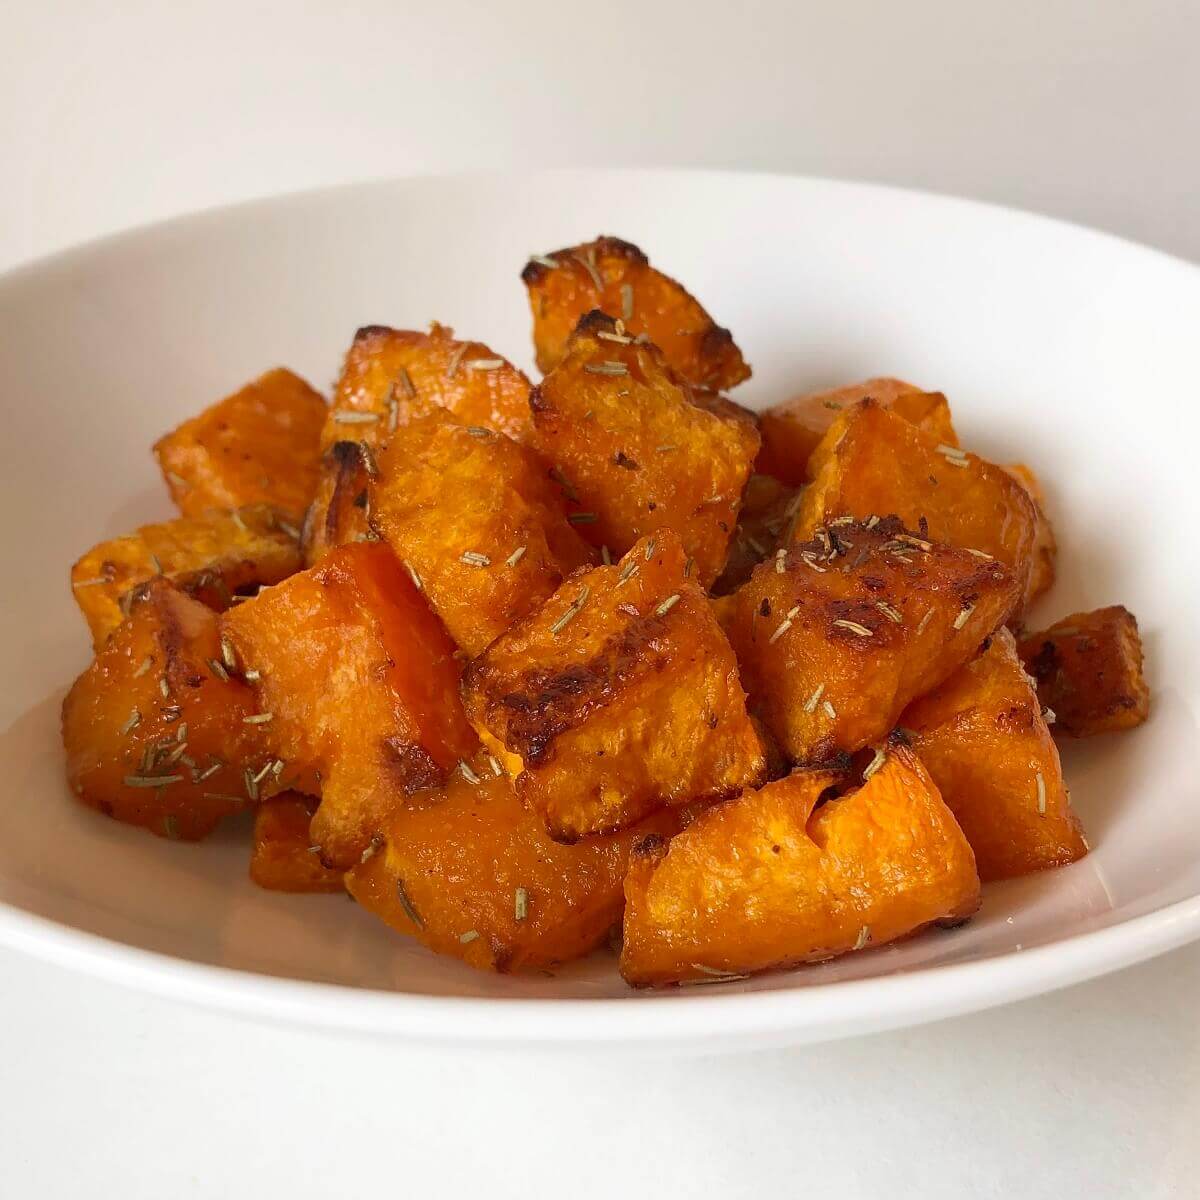 Roasted squash in a white serving bowl.